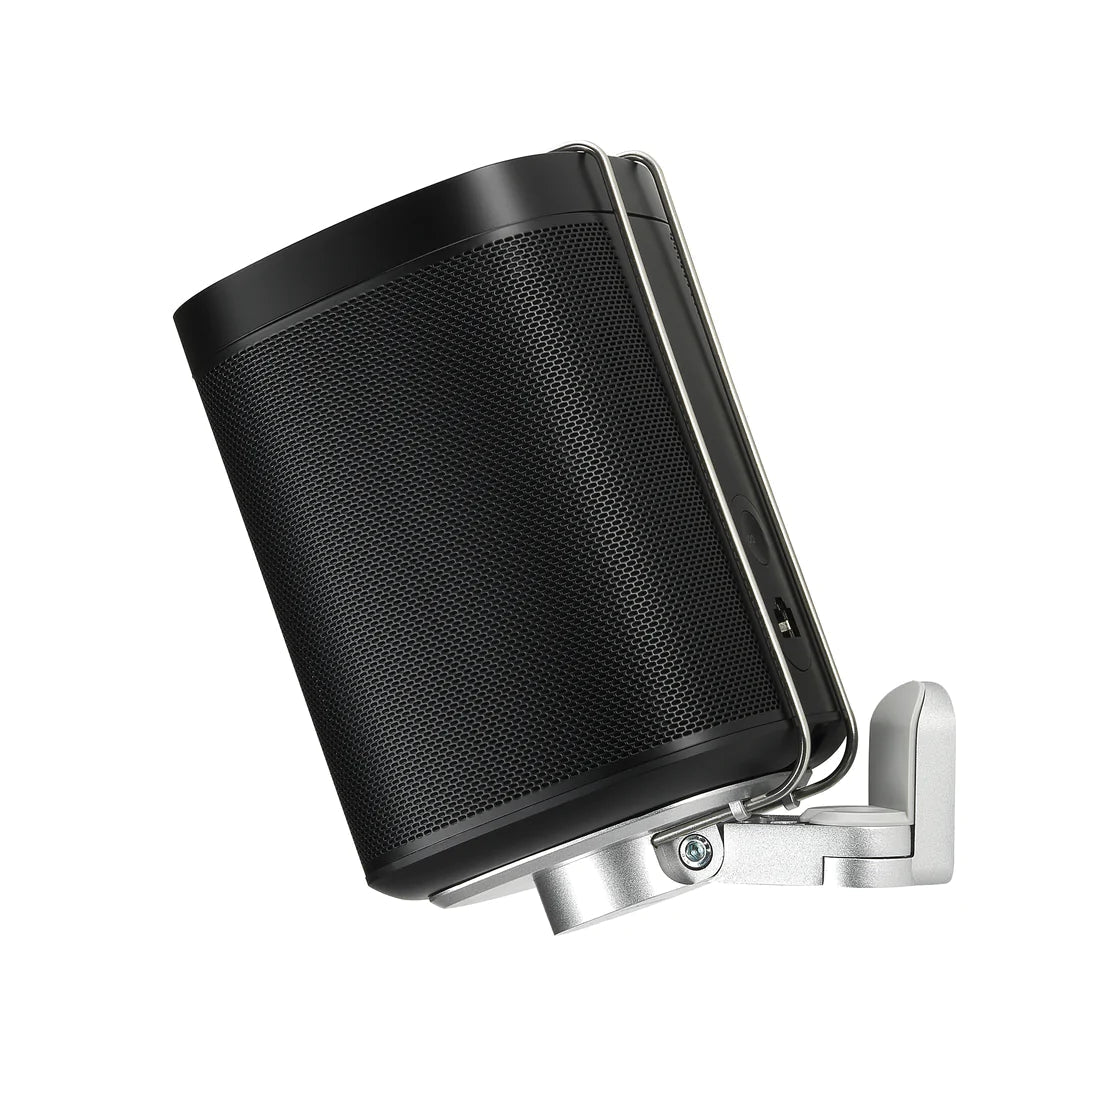 Mountson Premium Wall Mount for Sonos One, One SL and Play:1